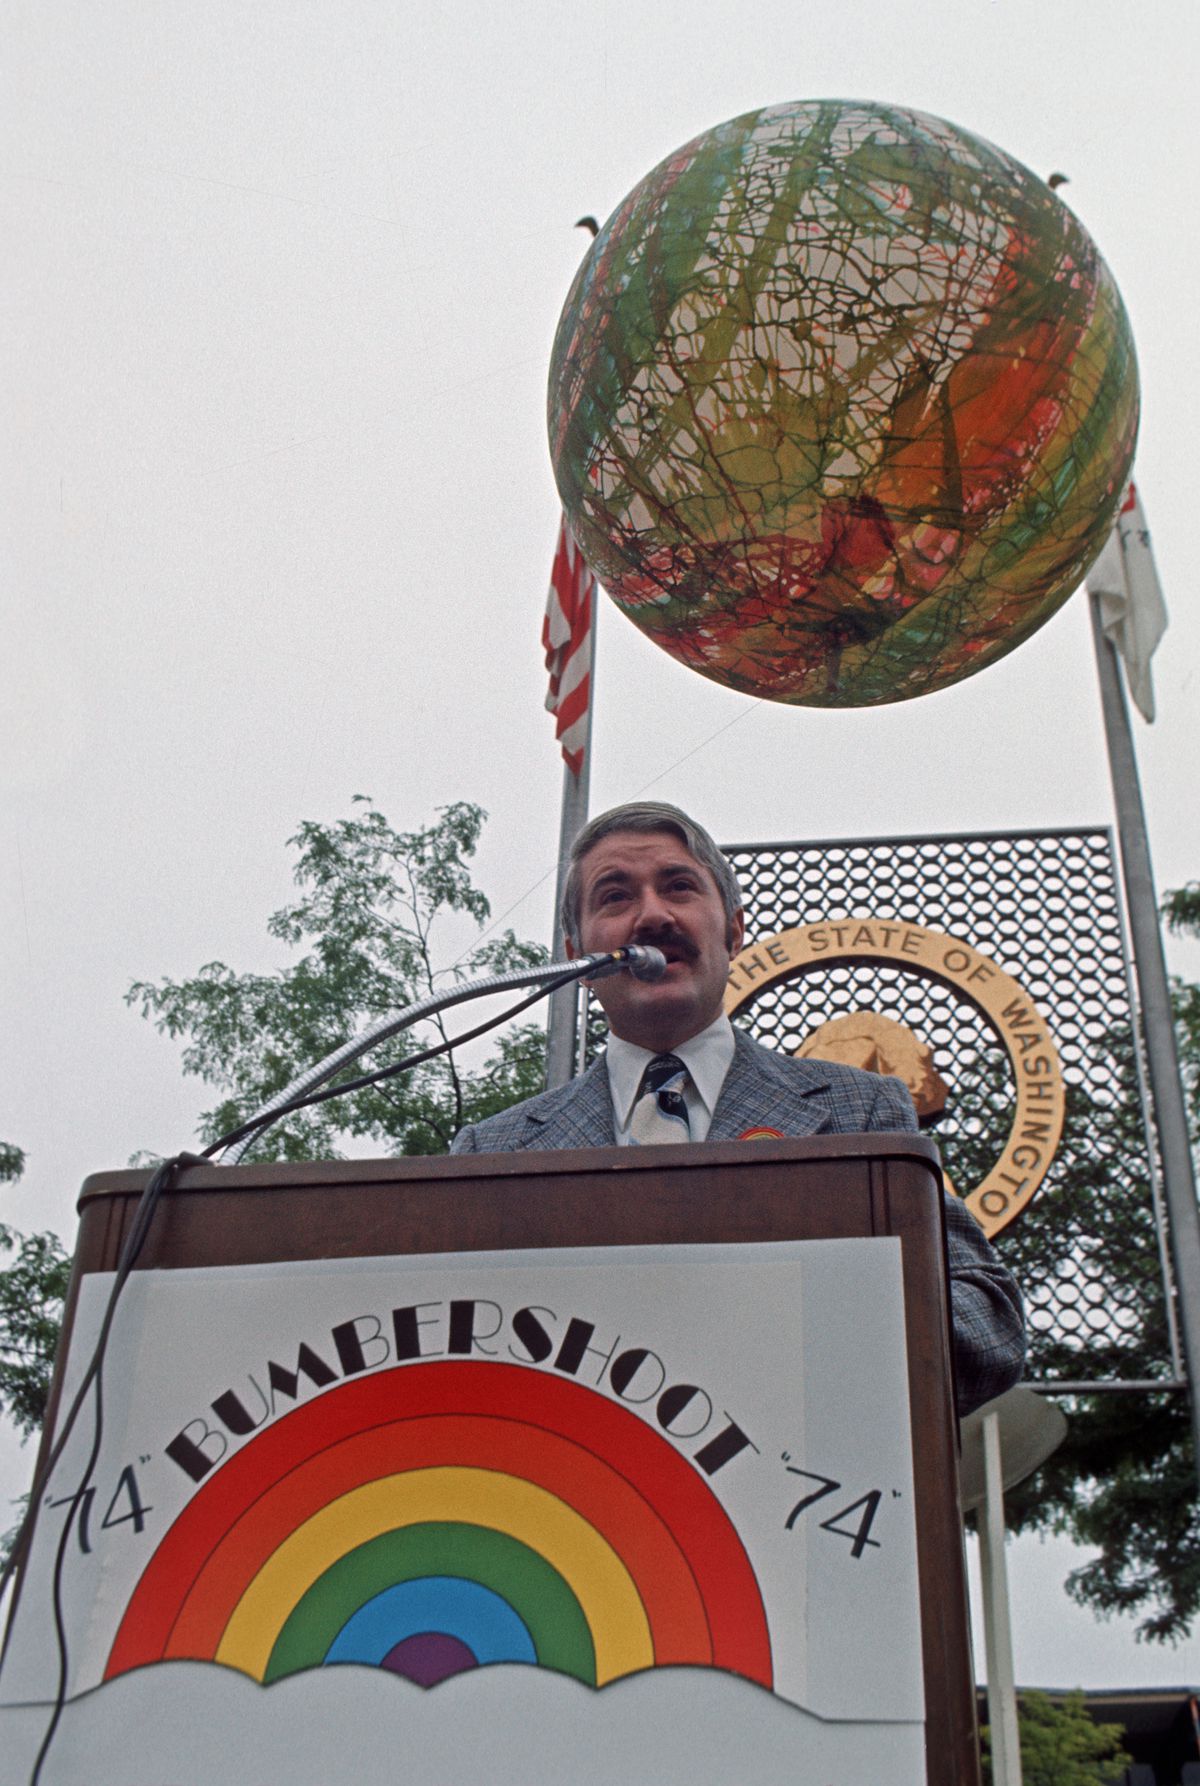 A man with gray hair, a brown mustache, and a gray suit speaks at a podium with a sign attached with a rainbow and the text “74 BUMBERSHOOT 74.”